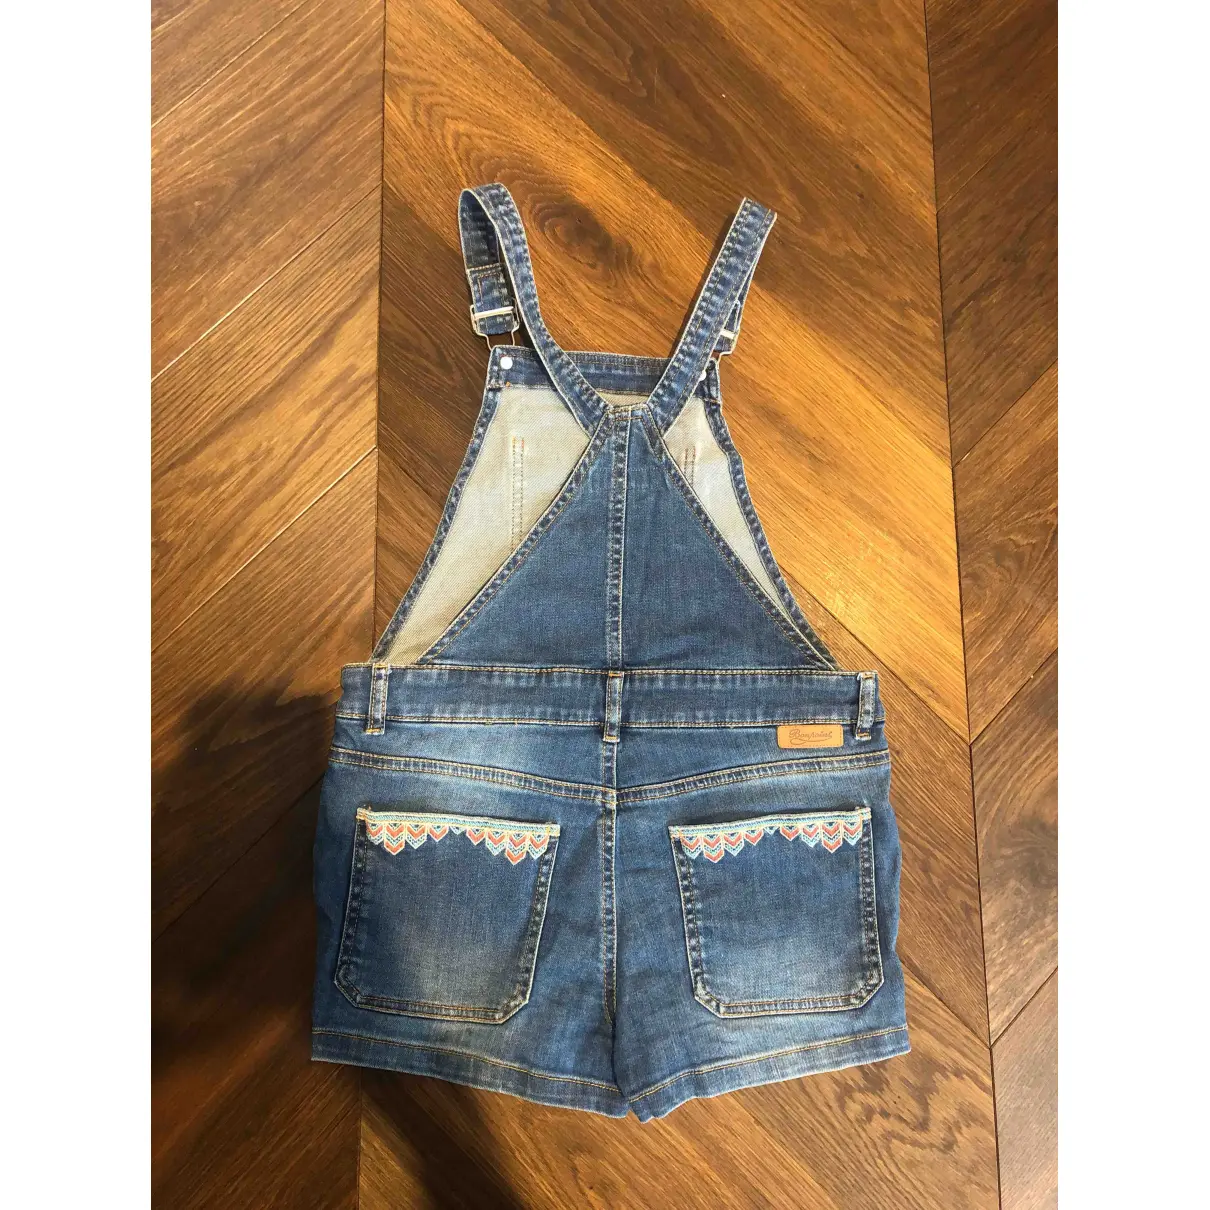 Buy Bonpoint Overall online